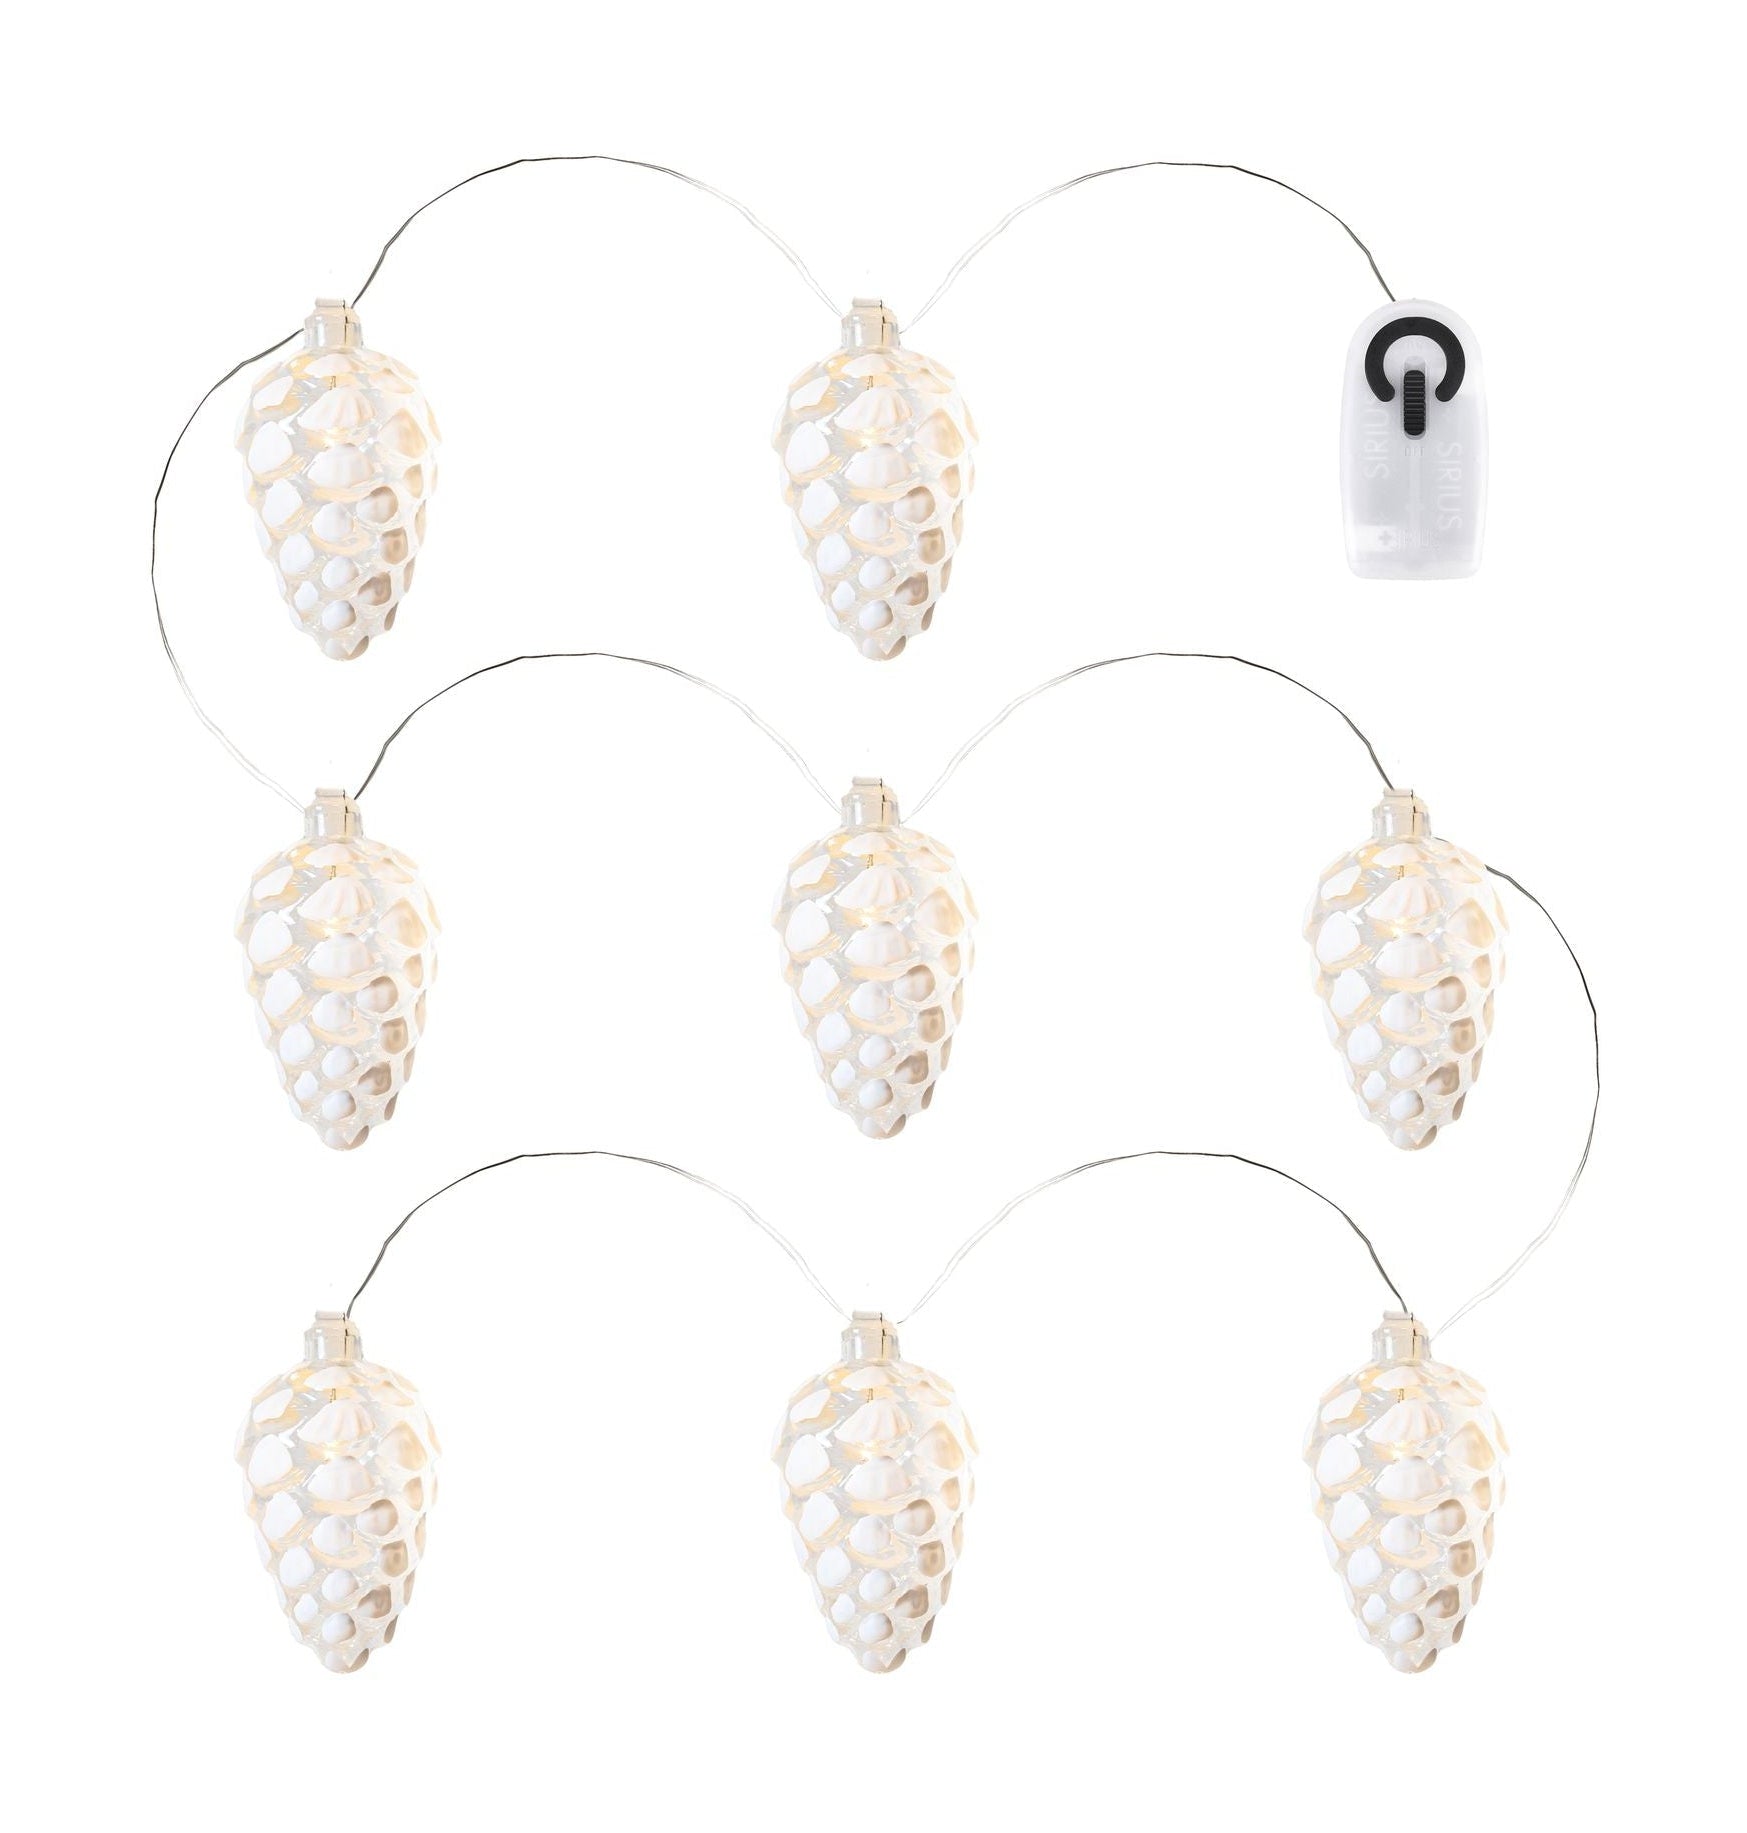 Sirius Celina Cone Garland 8 Le DS，白色